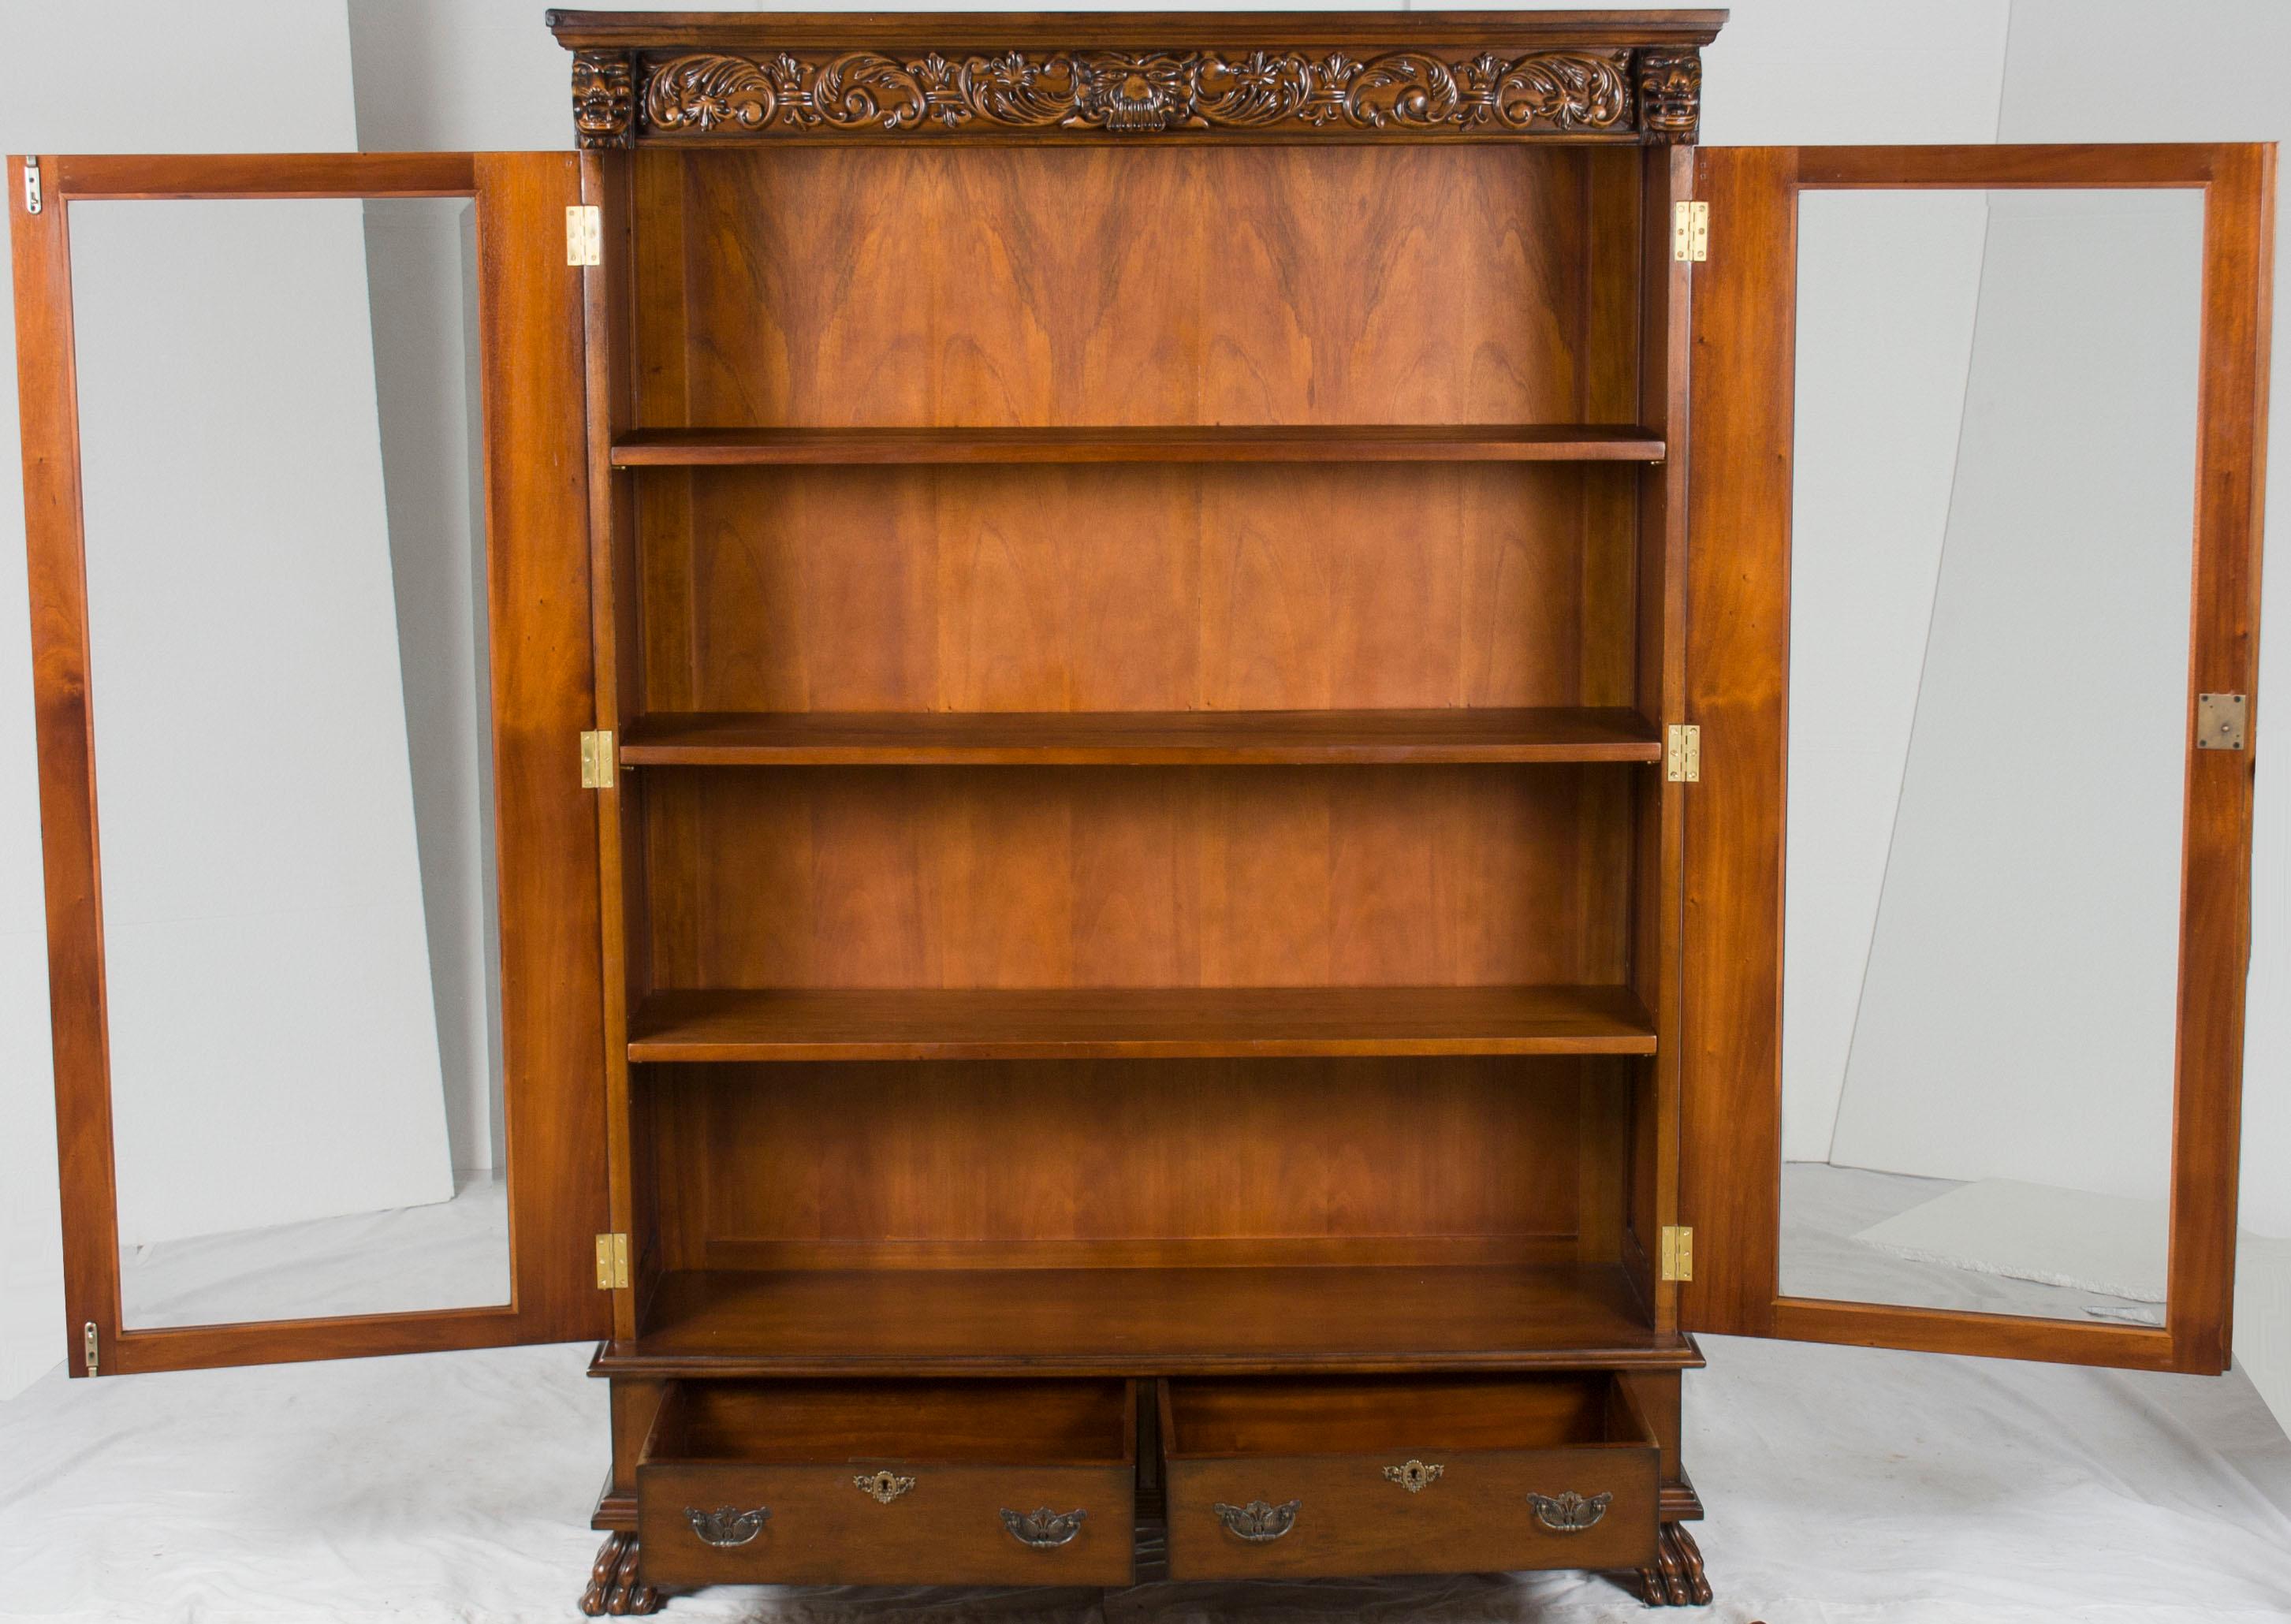 This carved mahogany glass door bookcase makes storing your books a stylish pleasure! This piece of furniture exudes style and charm by itself, and will look even better full of books!

The detailed carvings of this bookcase really help it stand